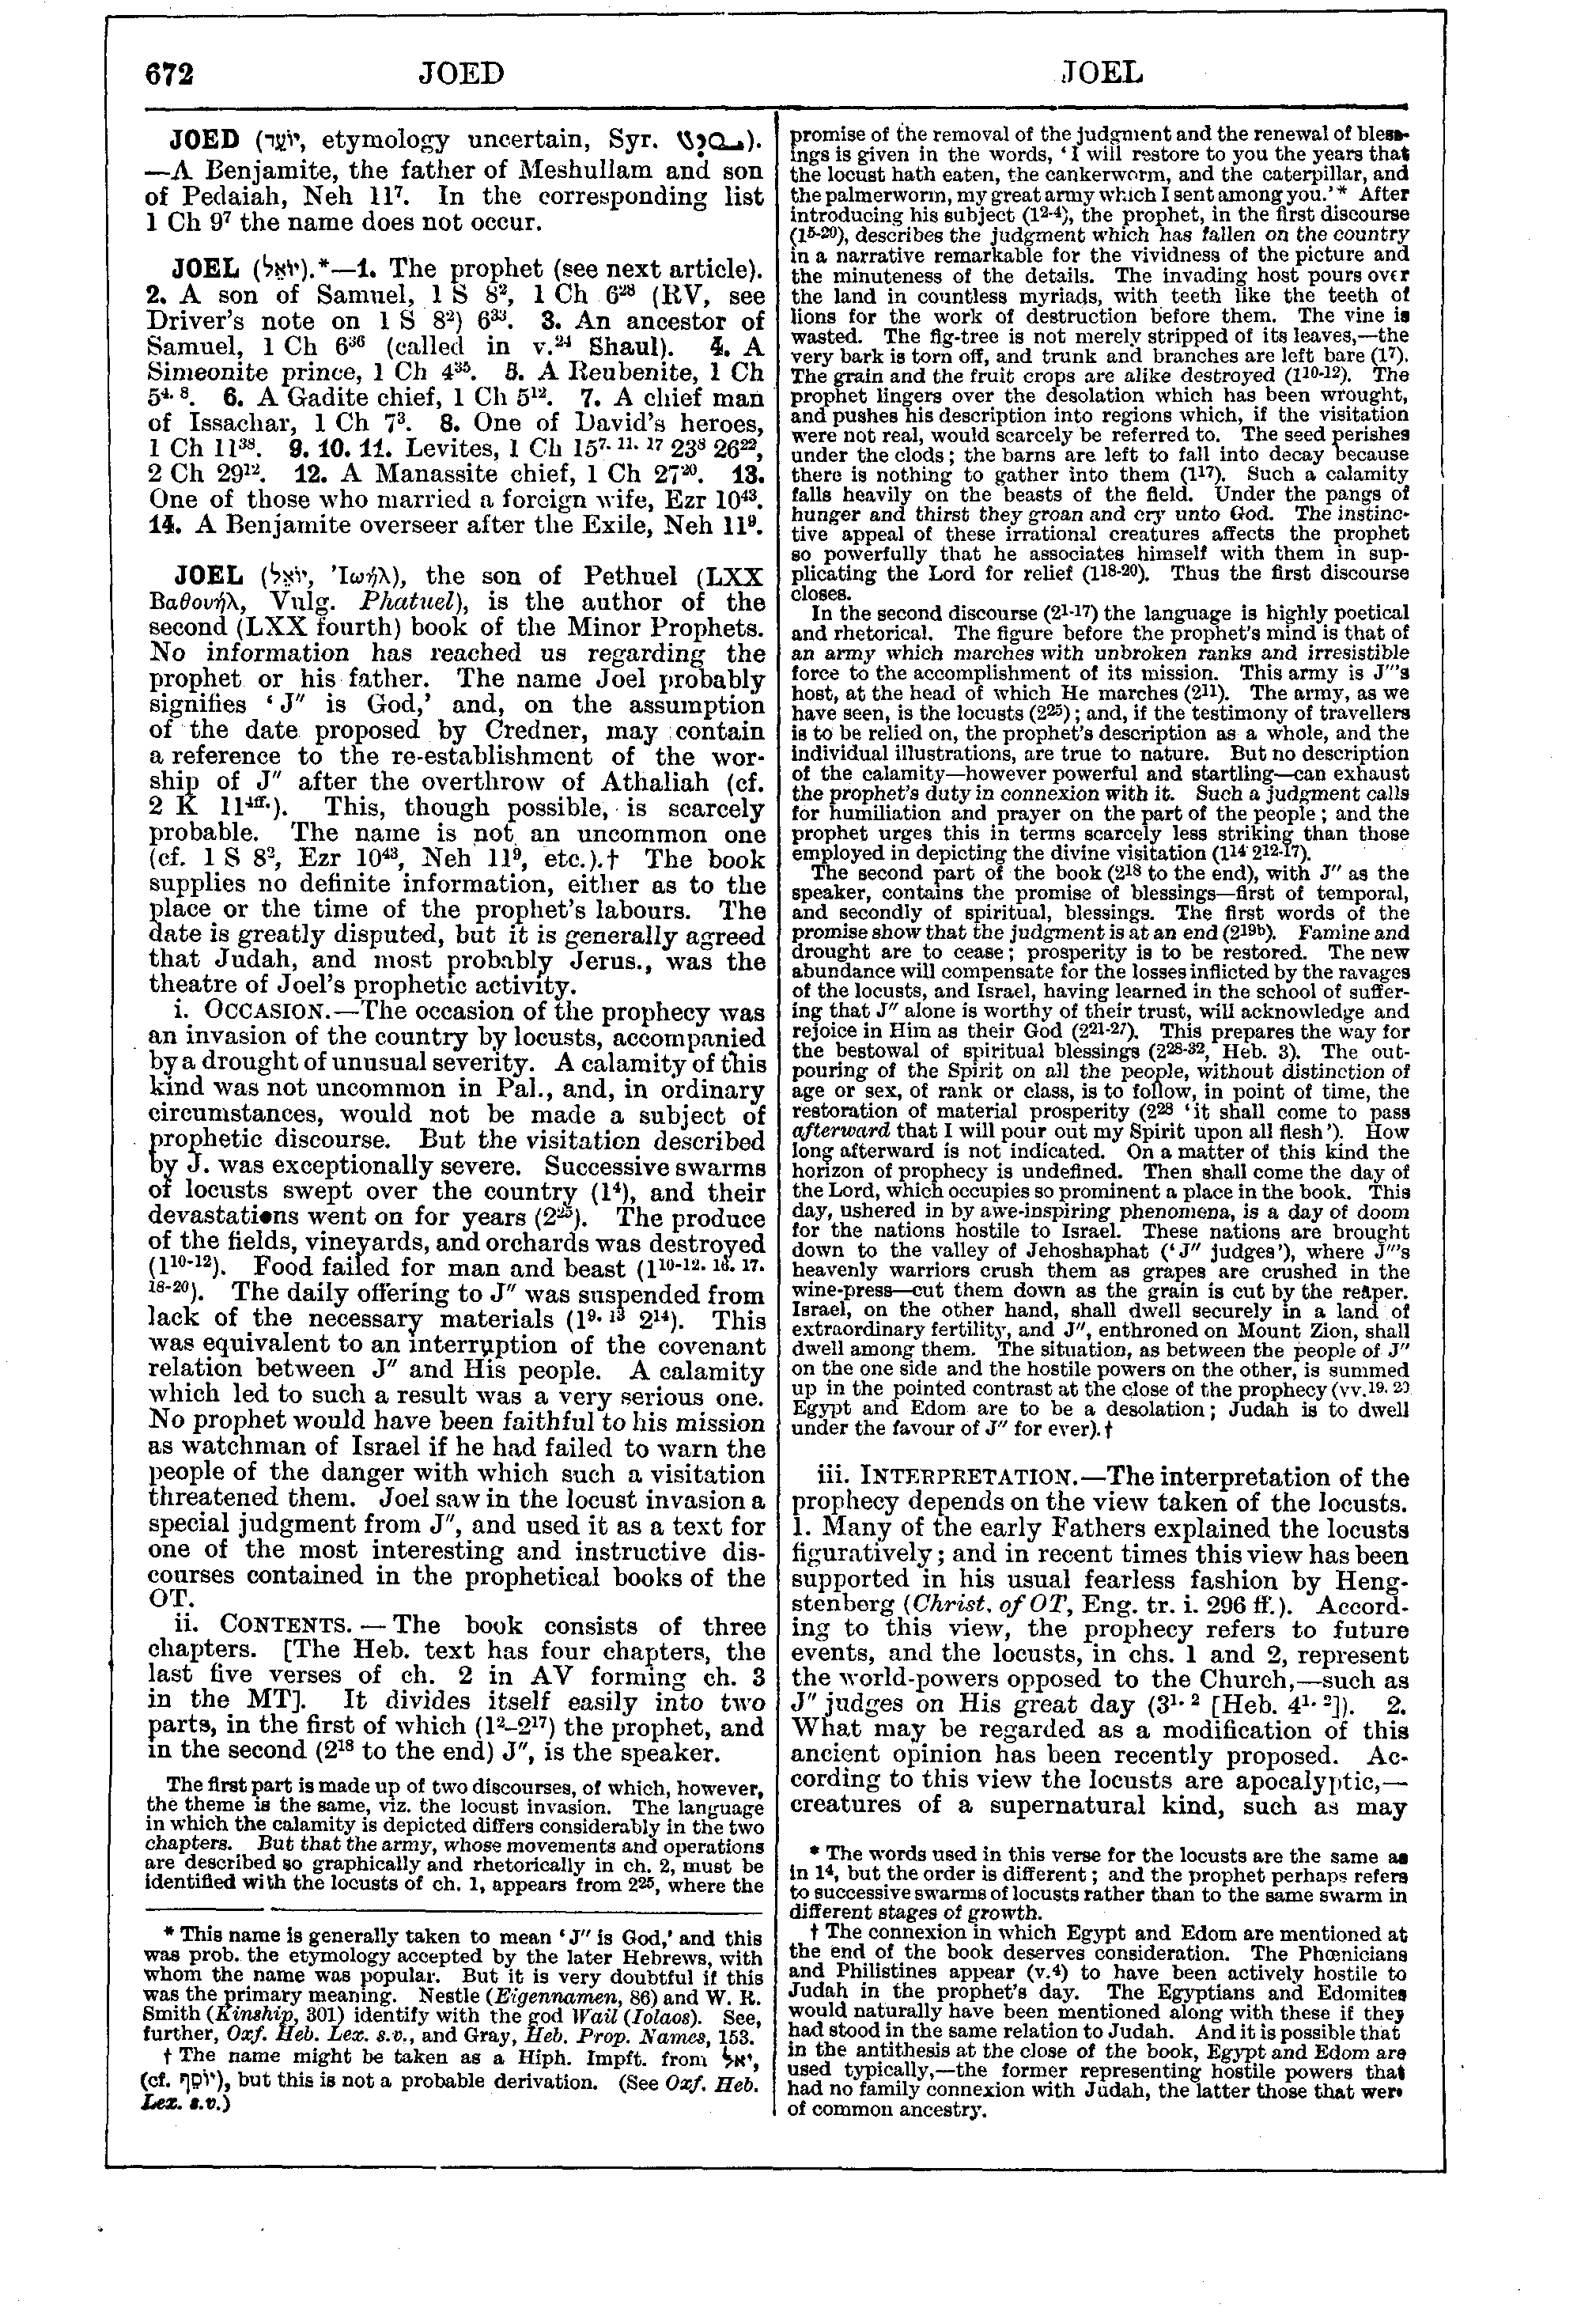 Image of page 672